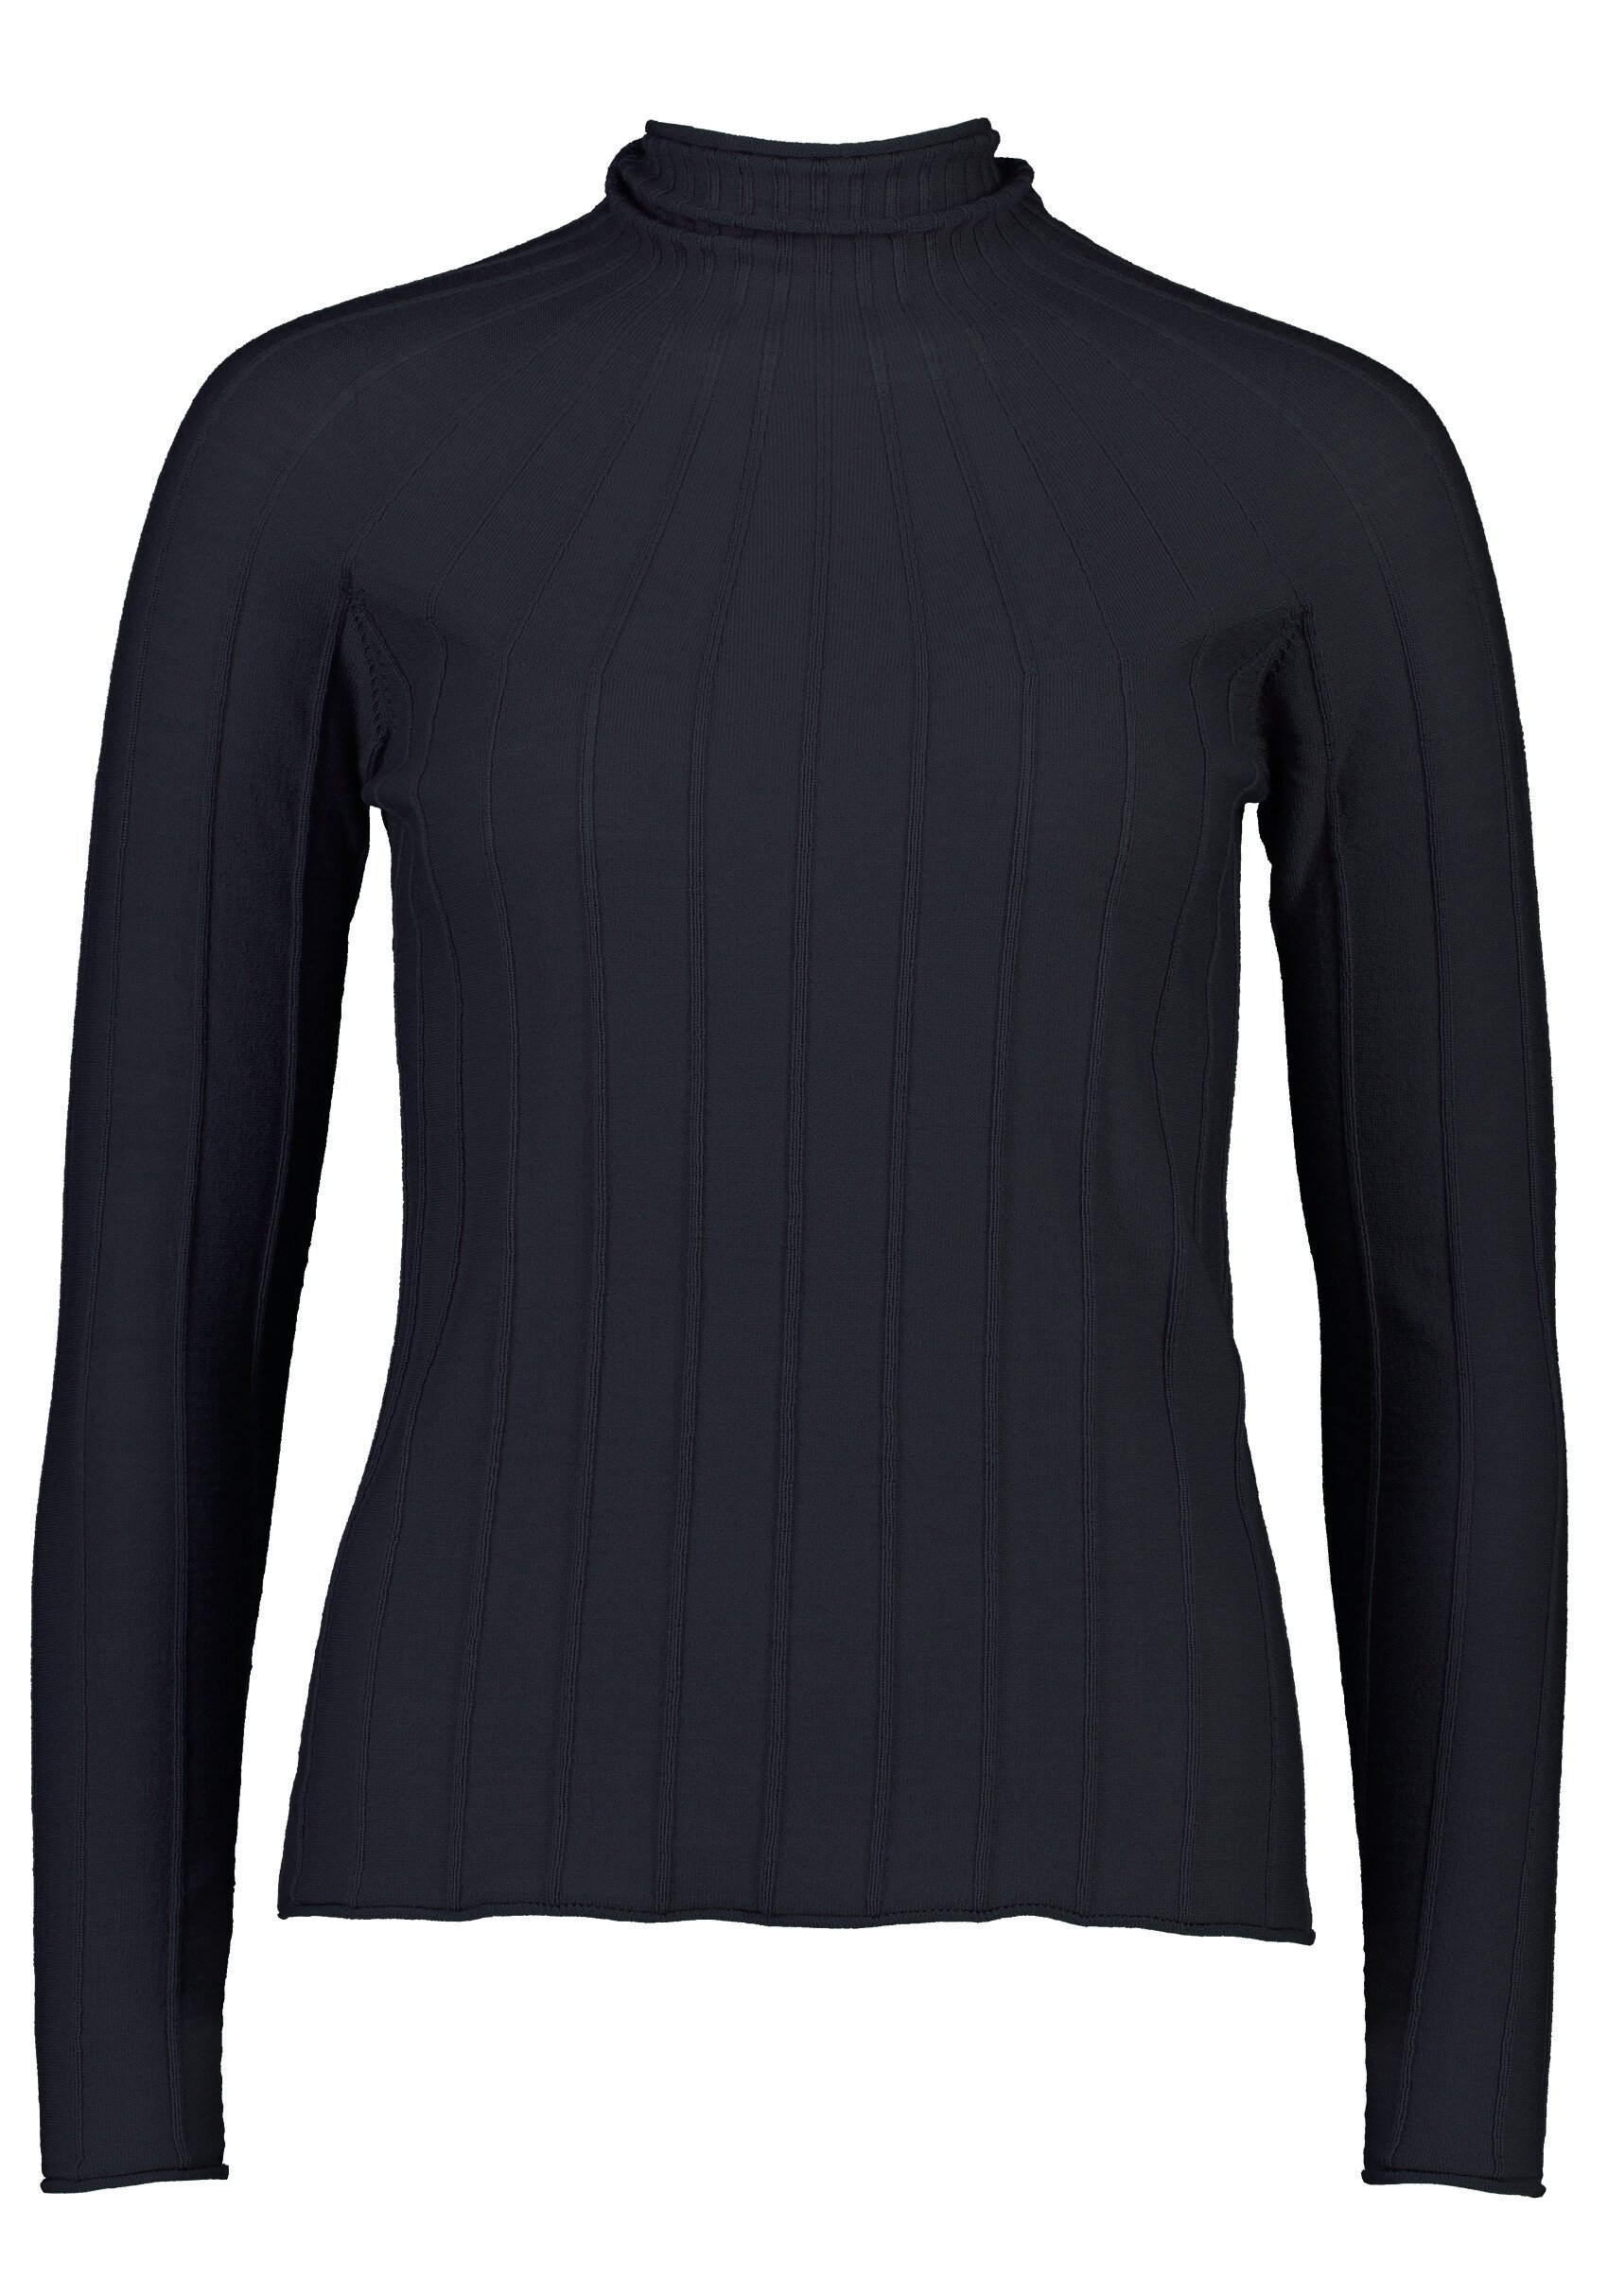 RADIAL SKIVVY (NAVY)- STANDARD ISSUE AW20 Boxing Day Sale